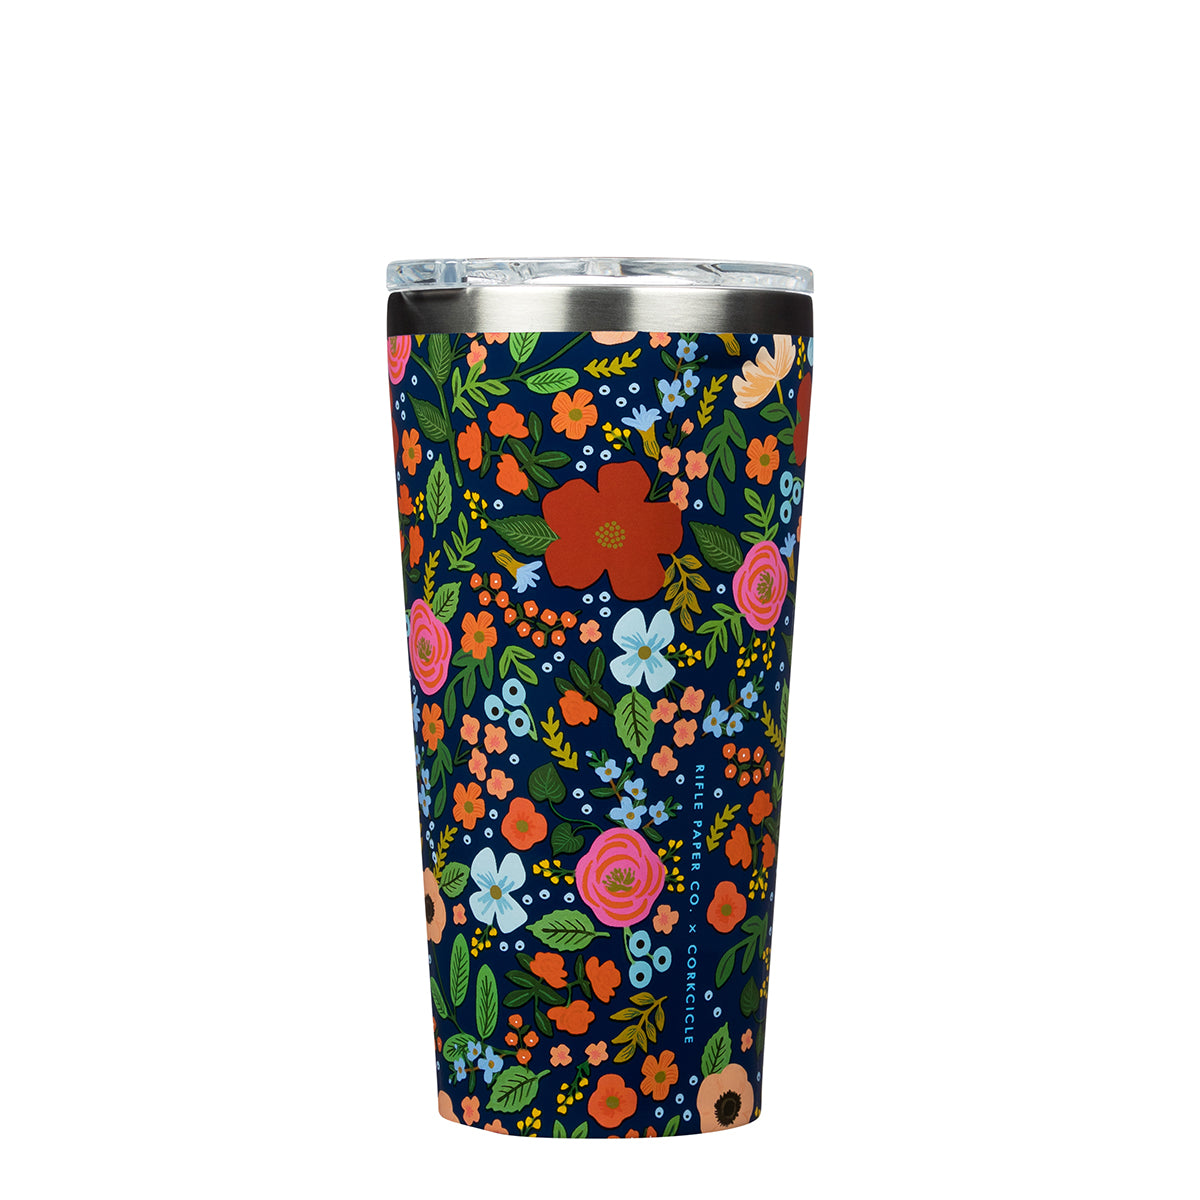 CORKCICLE x RIFLE Stainless Steel Insulated Tumbler 16oz (470ml) - Wild Rose